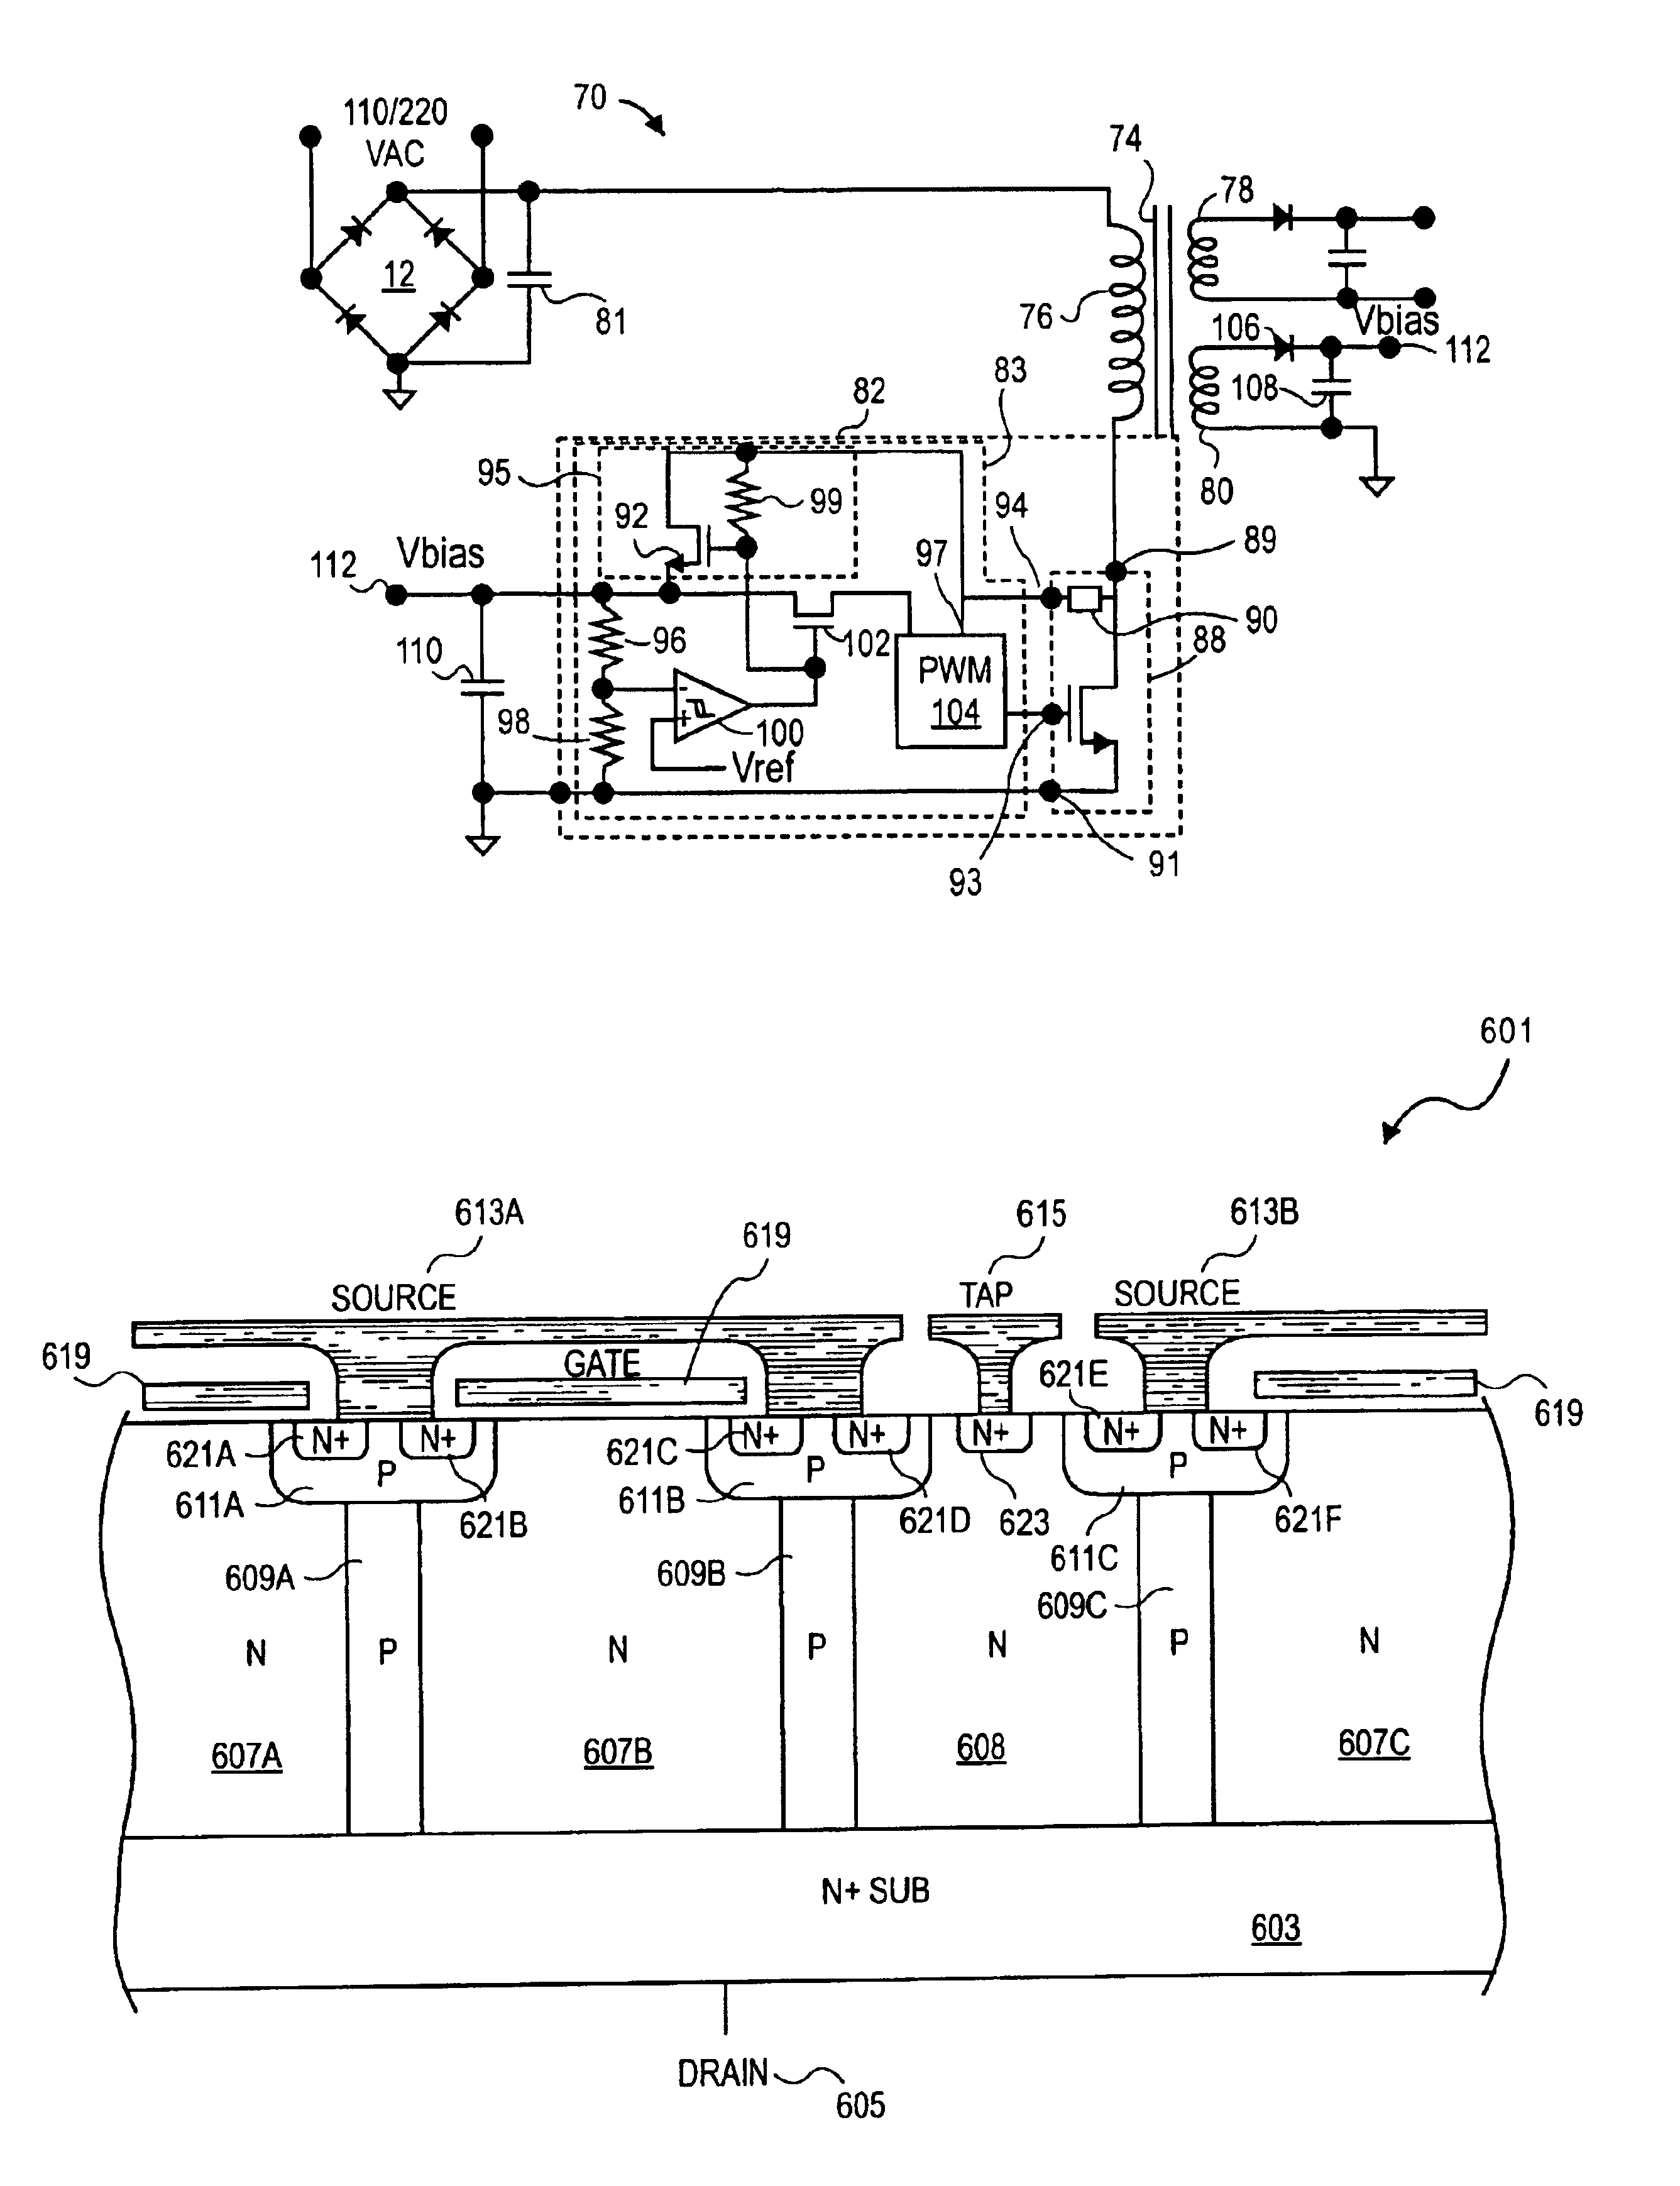 Electronic circuit control element with tap element